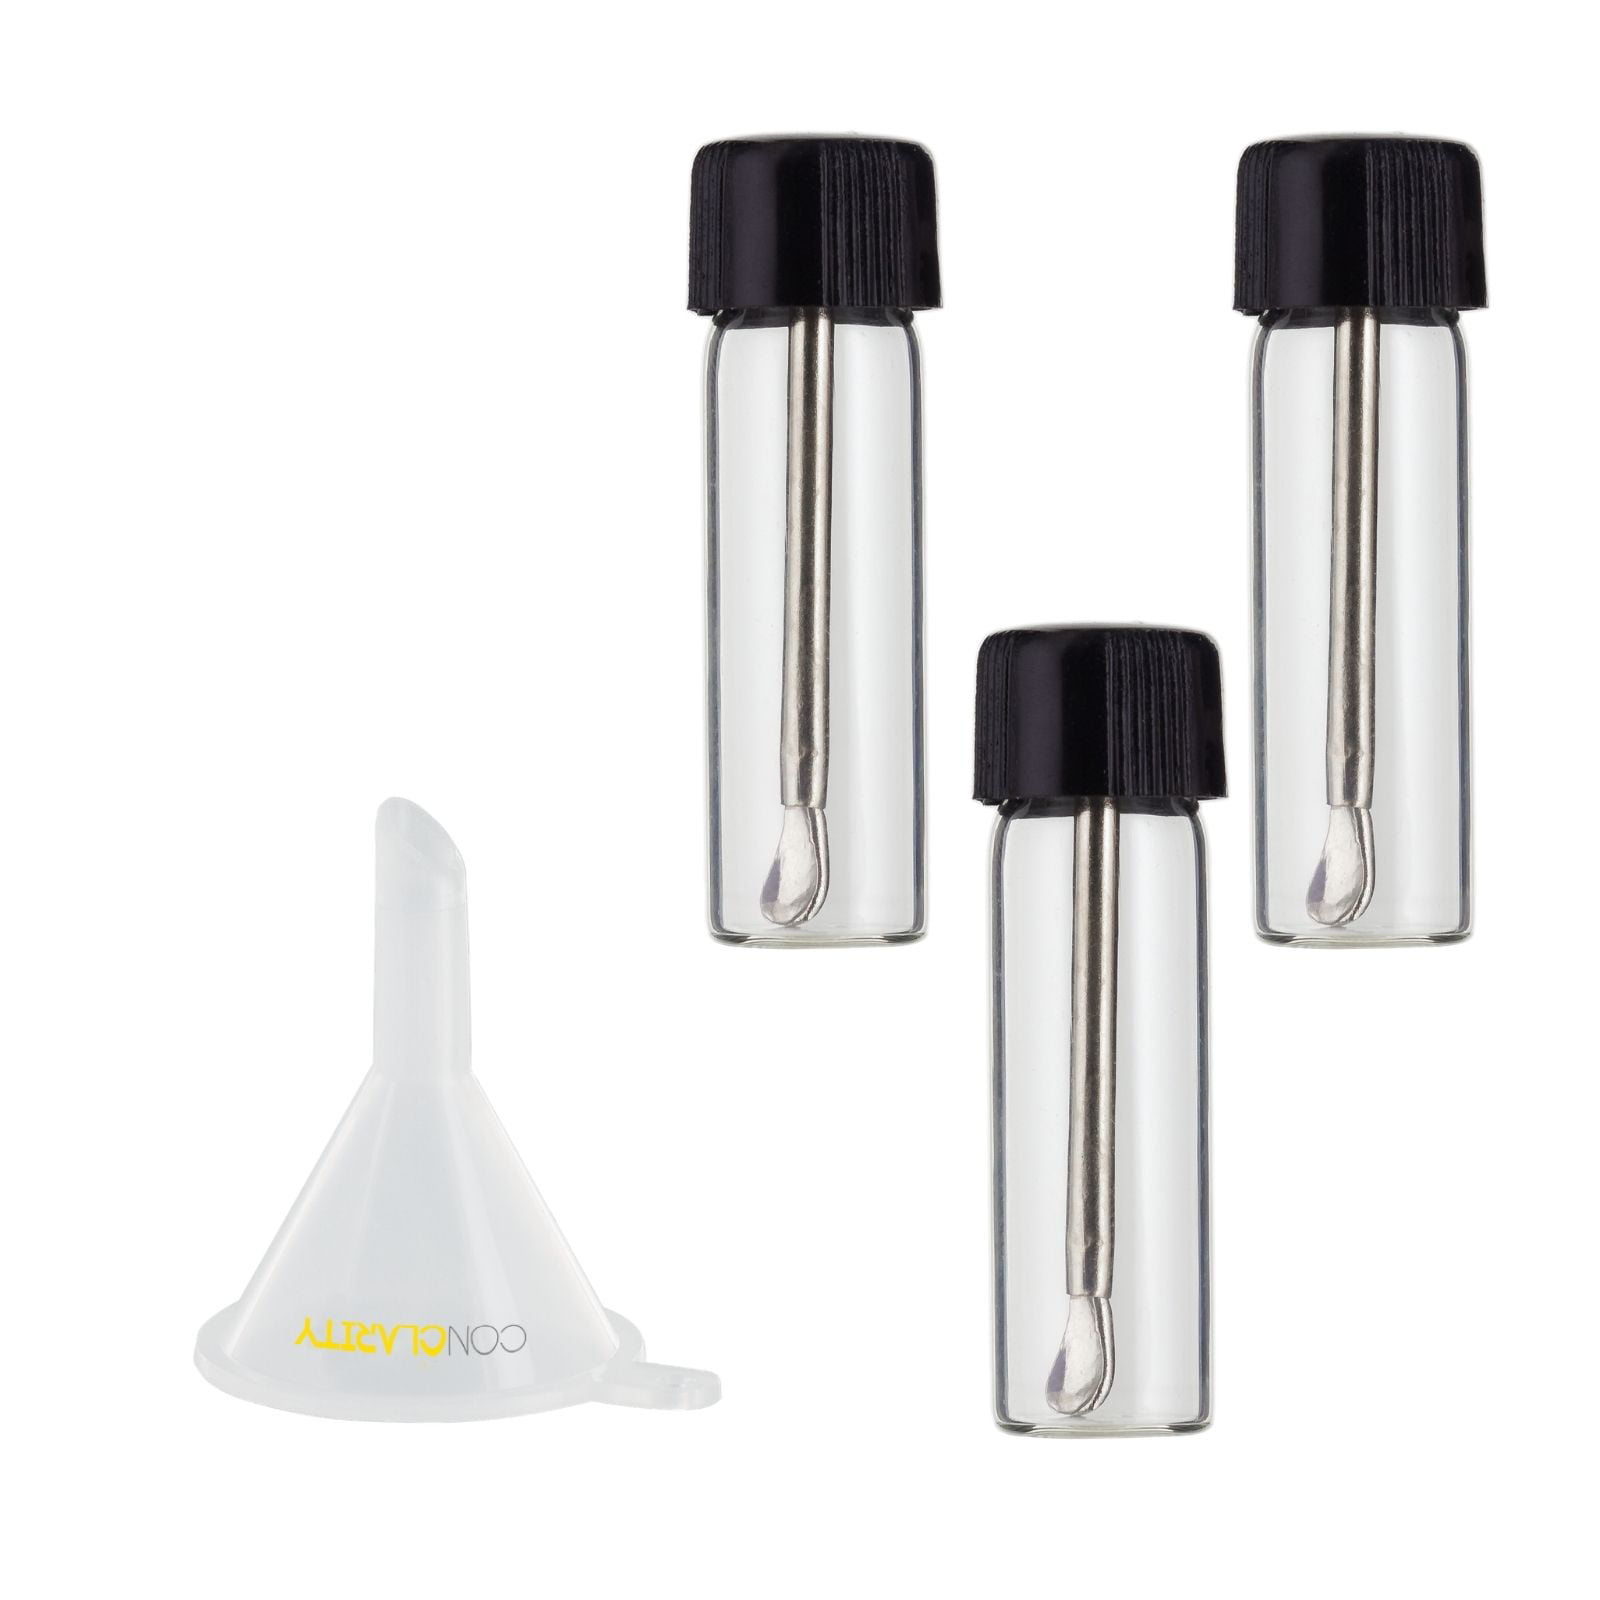 with ConClarity Micro Funnel Premium 3g Tall Black Snuff Bullet Spice Storage 3 Pack Bundle Glass and Acrylic 